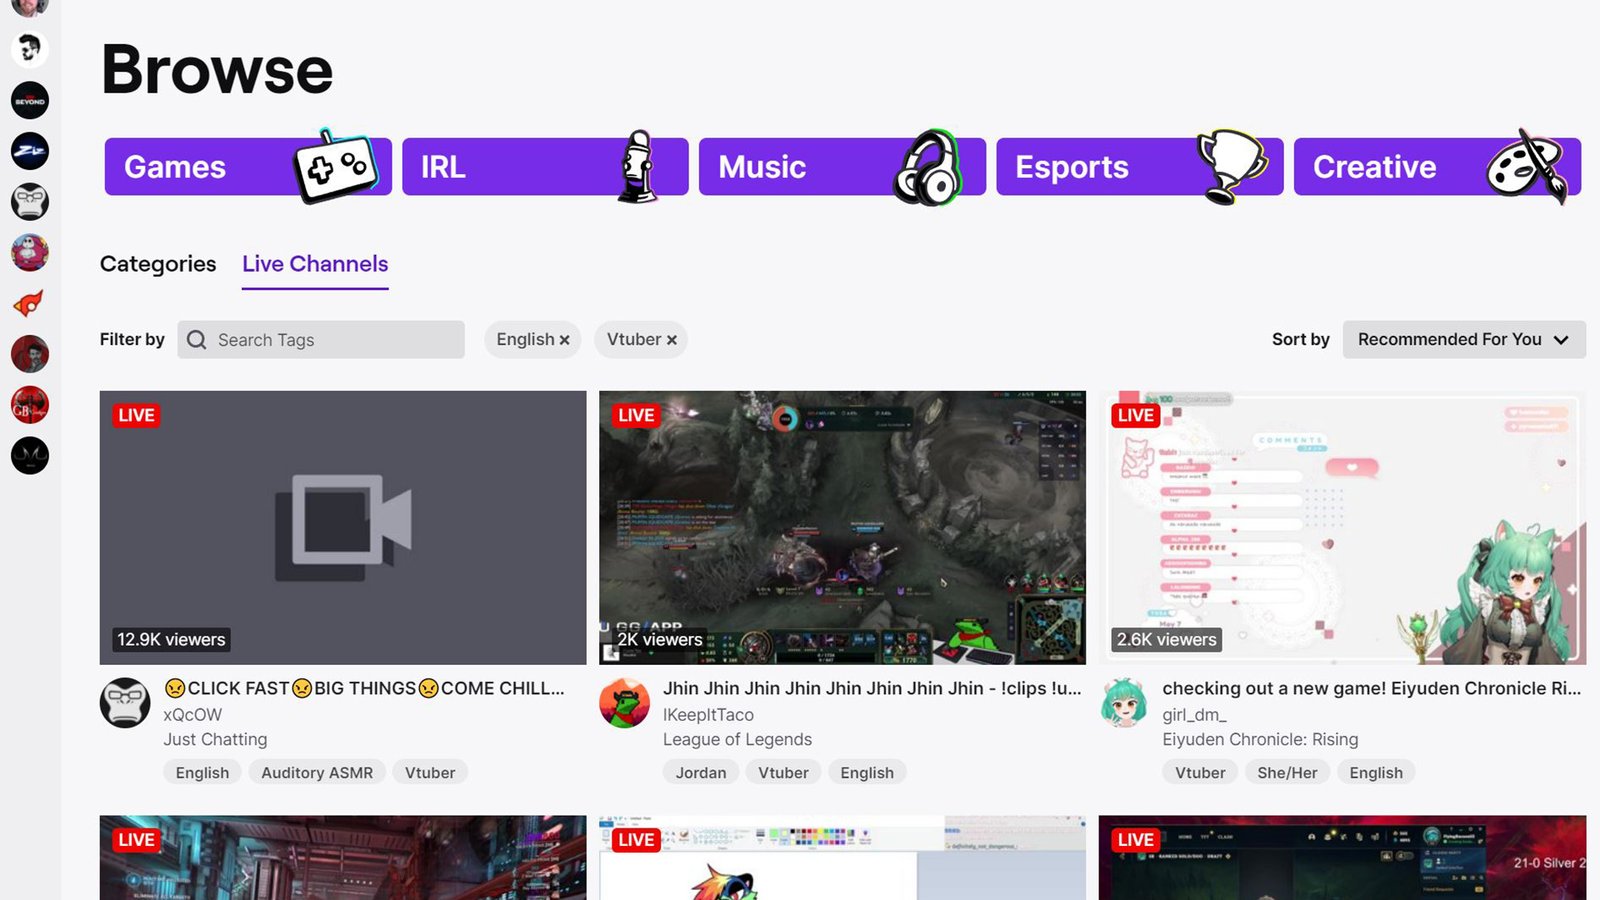 VTuber tag page on Twitch that features xQc in the top spot.